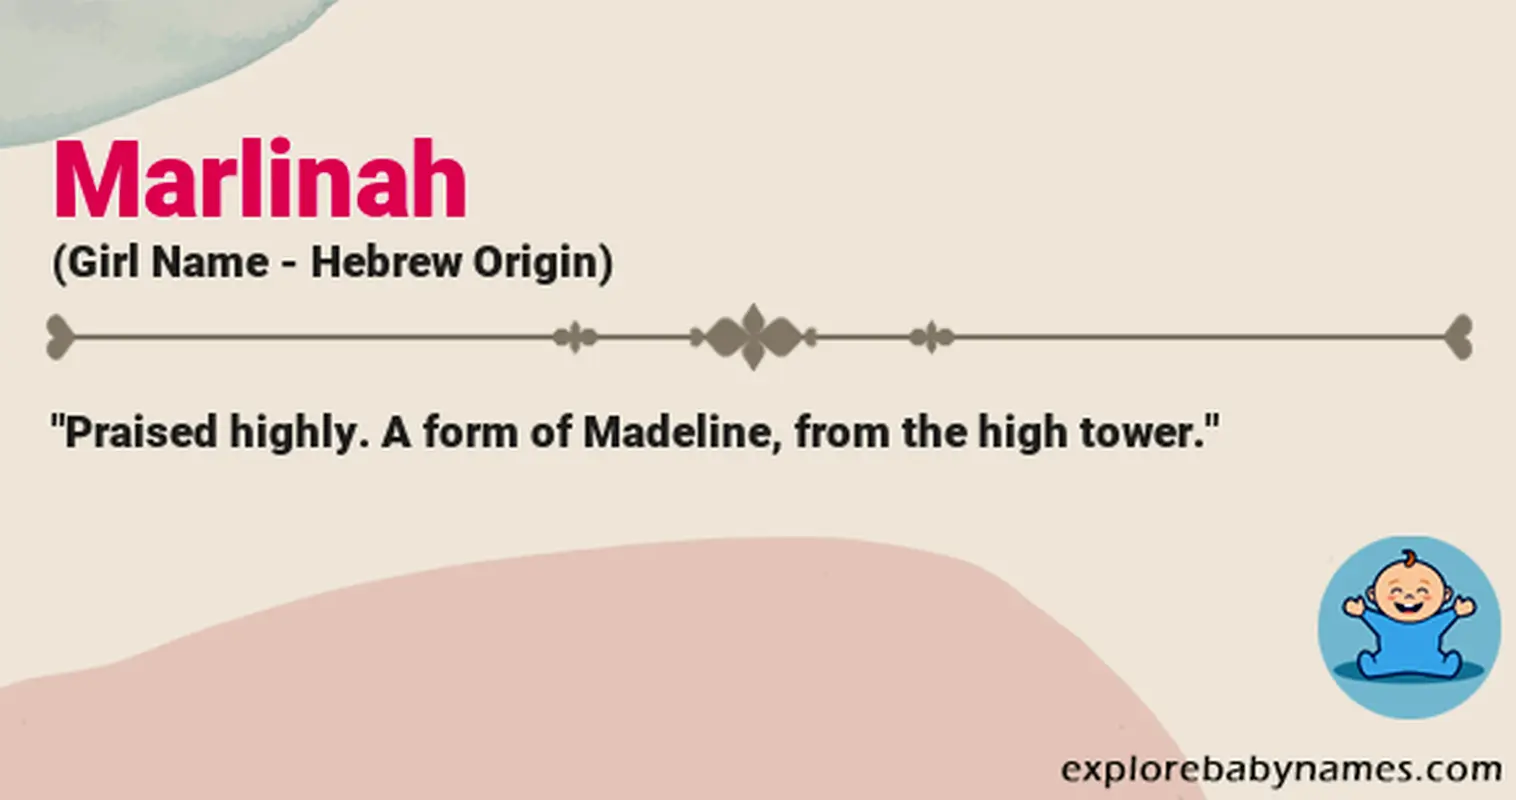 Meaning of Marlinah